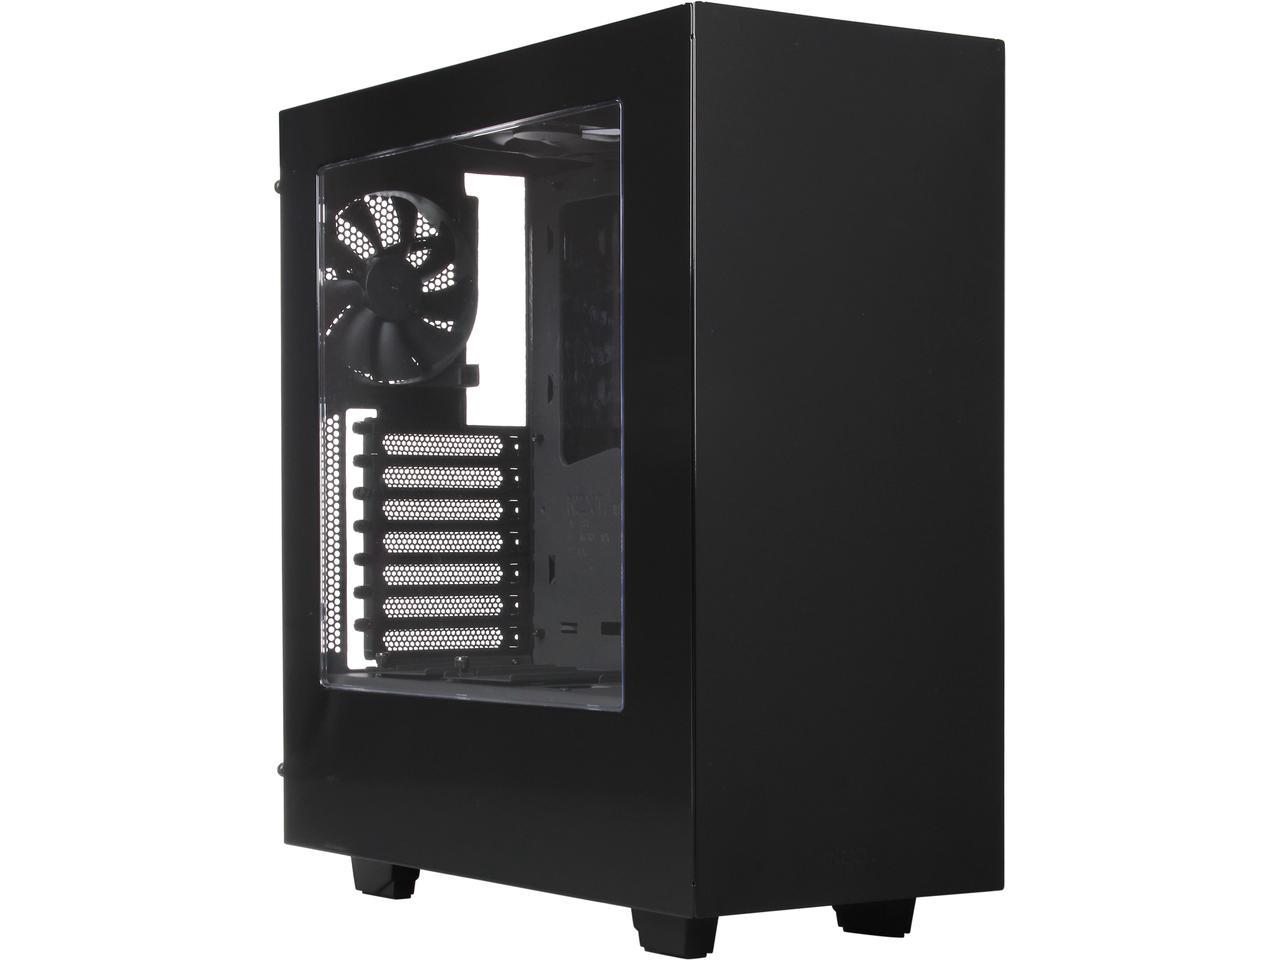 NZXT S340 Glossy Black Steel ATX Mid Tower Case